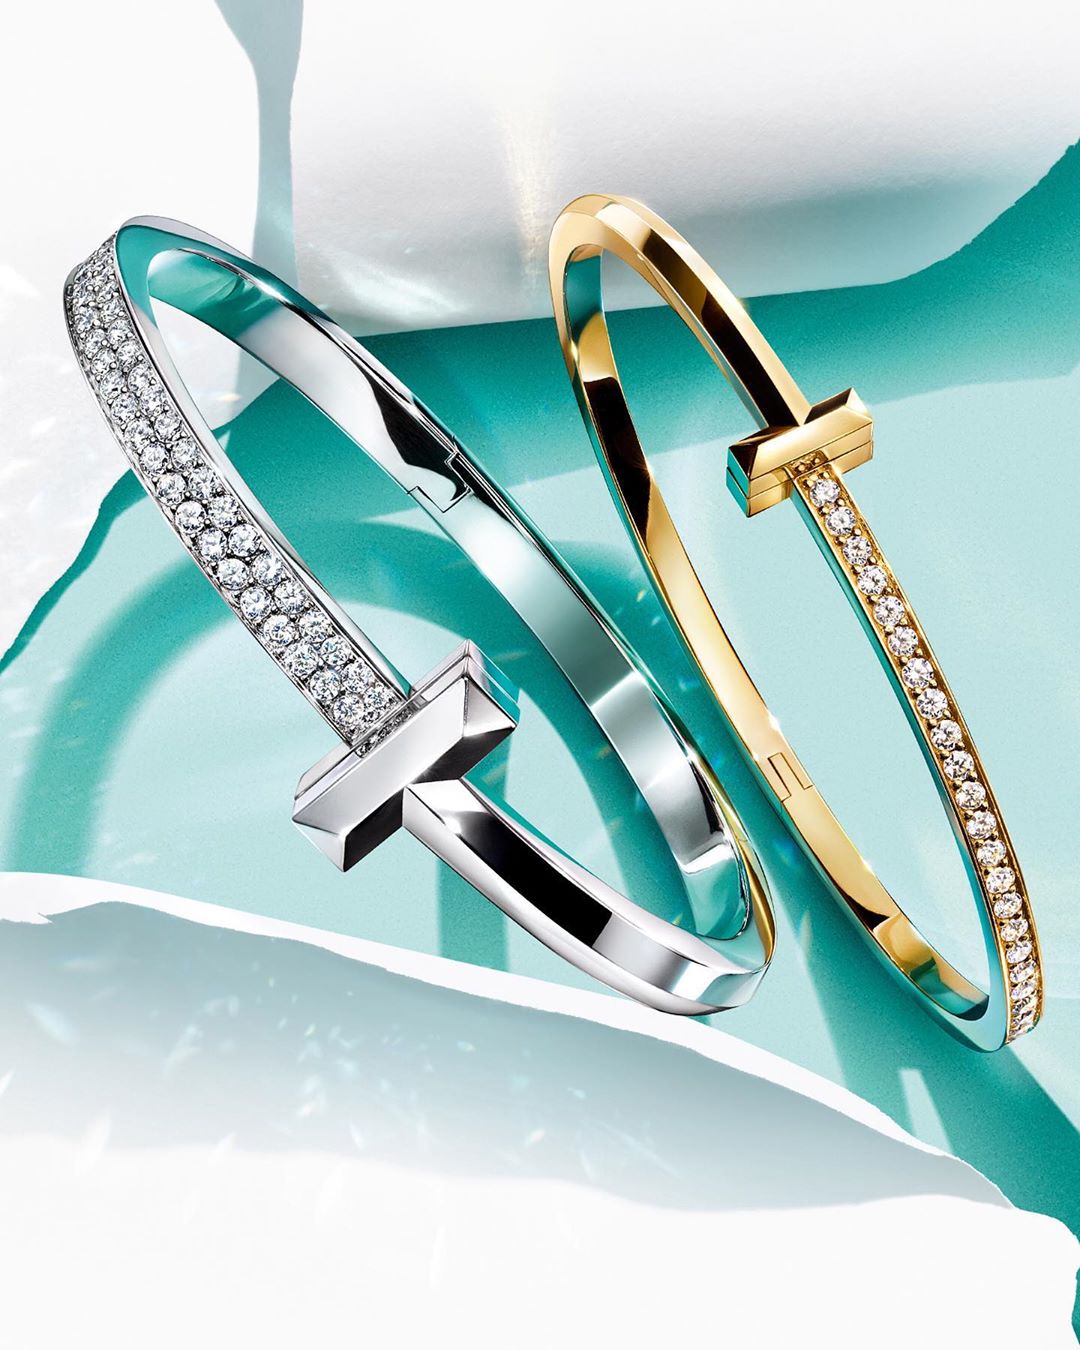 Tiffany & Co. - Unwrap something new. Tiffany T1—now in 18k yellow and white gold—features hand-set pavé diamonds for maximum radiance. Tap for off-the-cuff style and discover more via the link in bio...